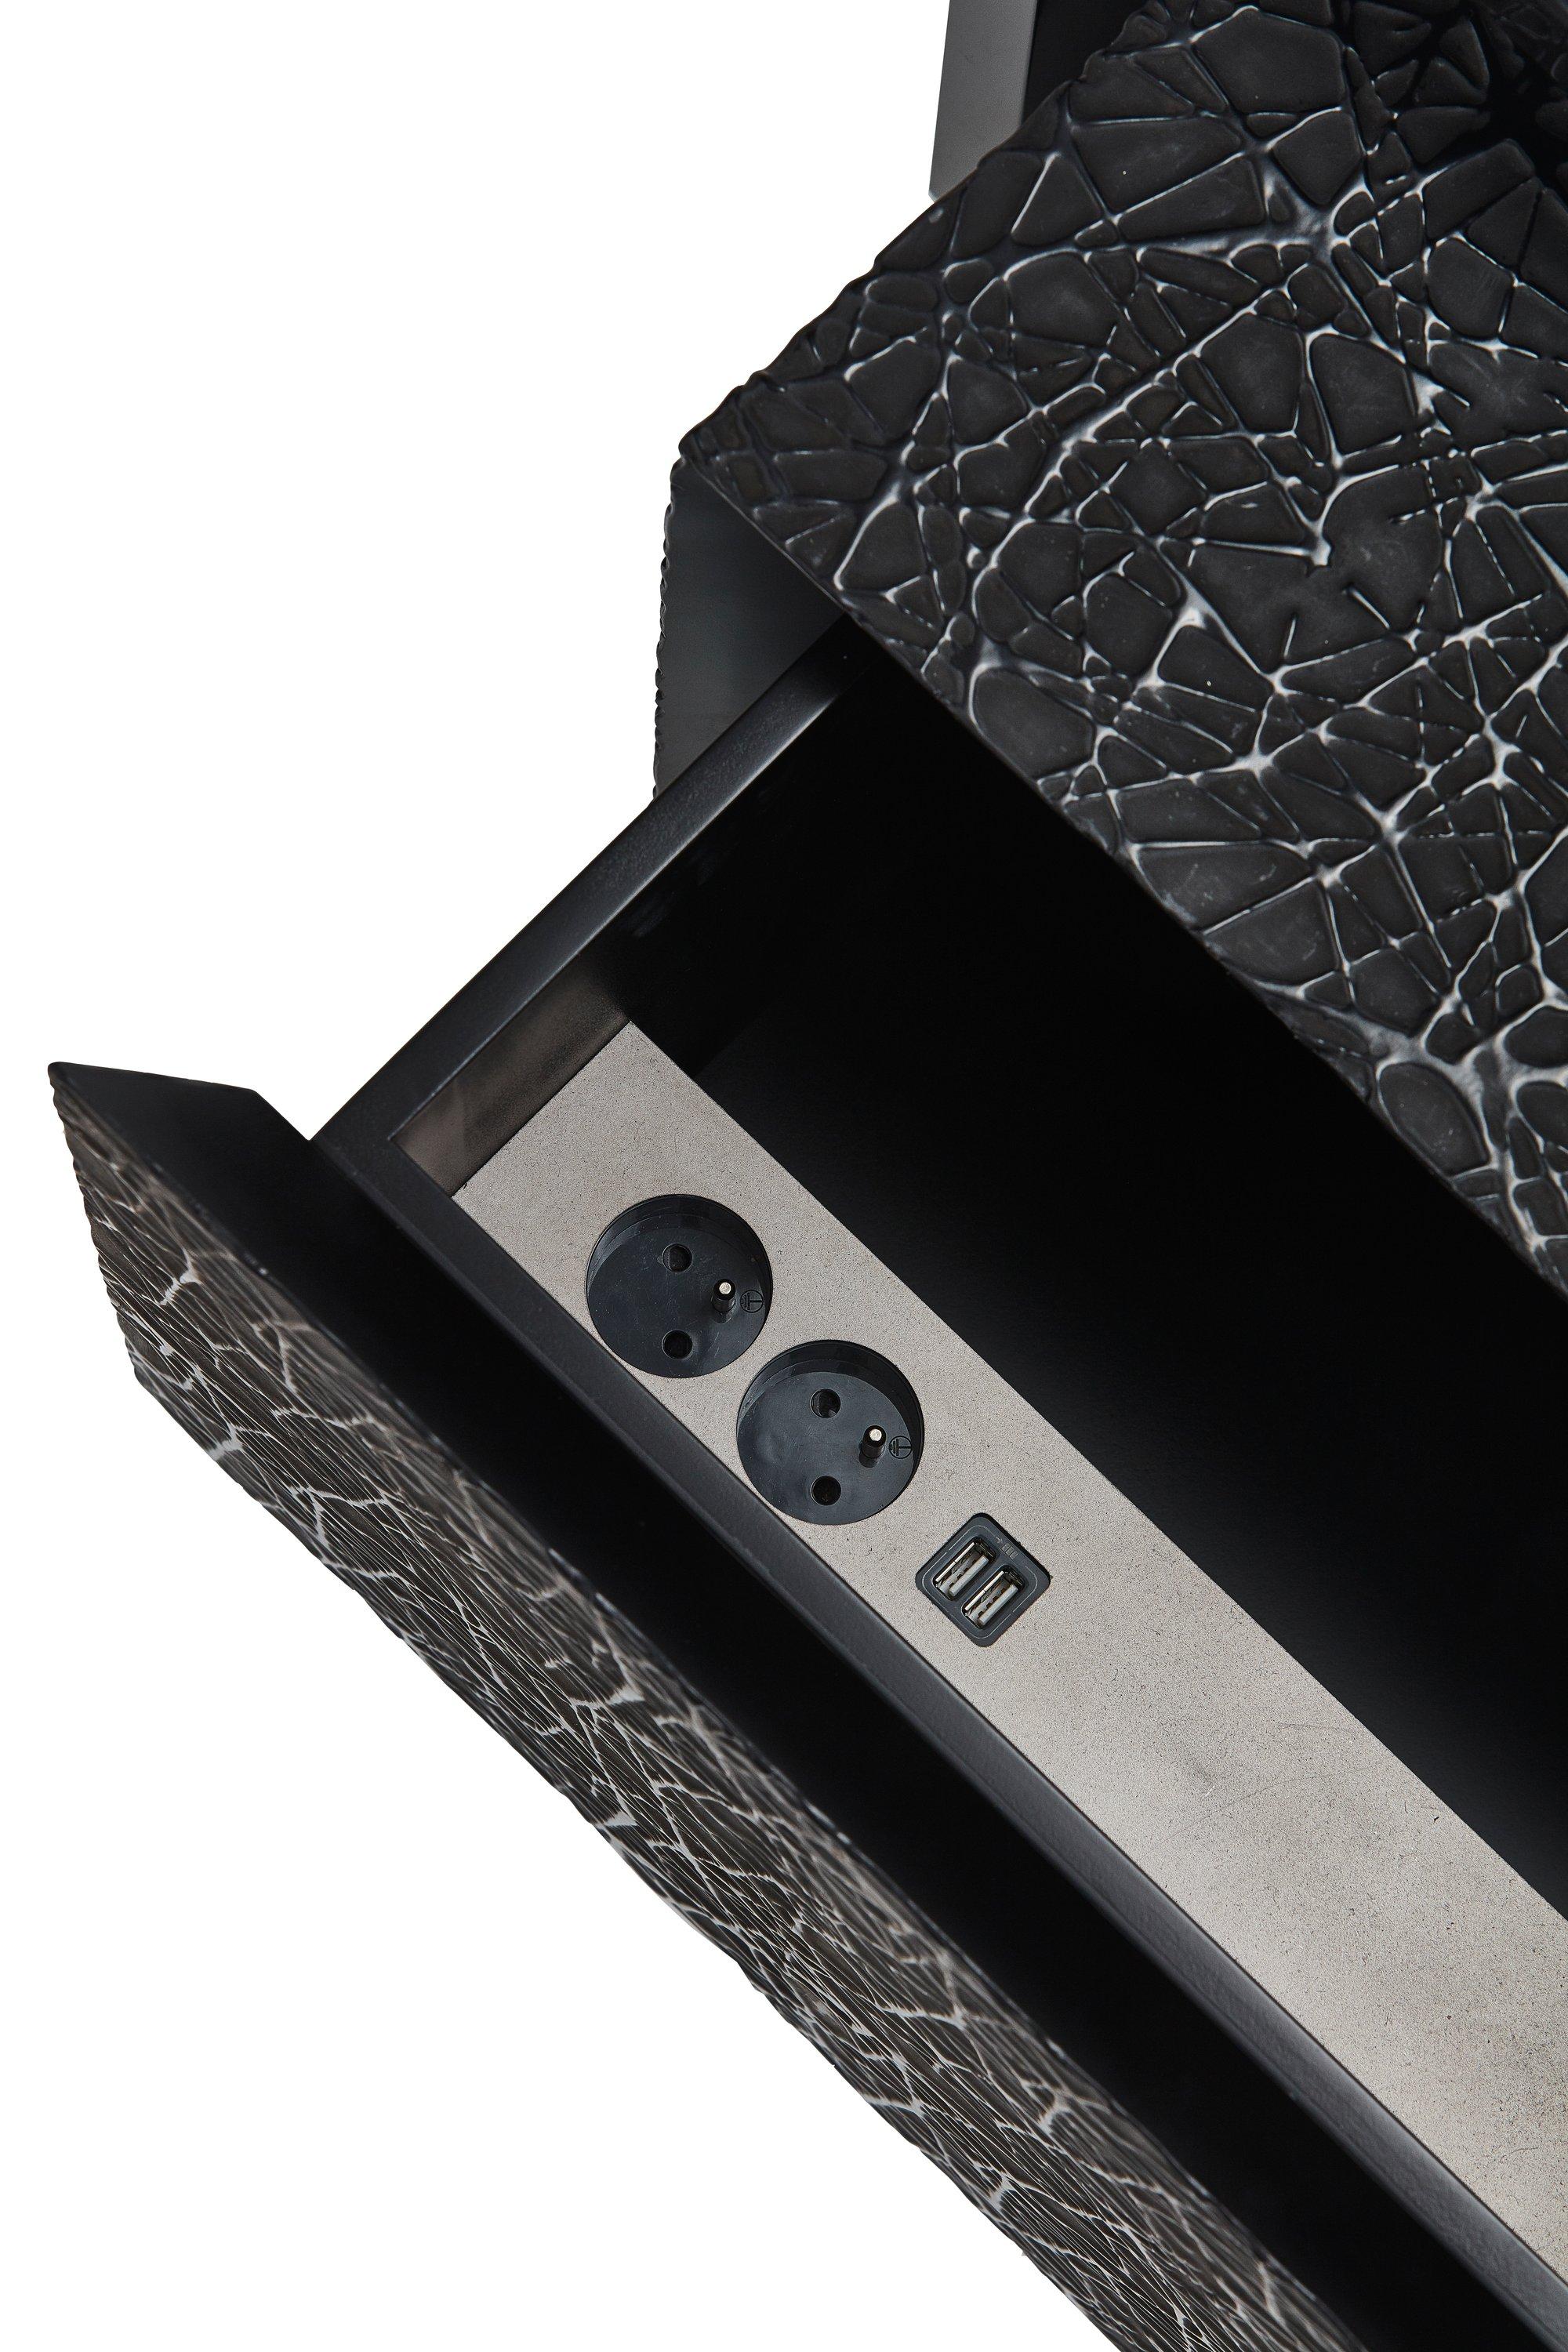 Polished Duo Side Tables with Piano Black Lacquer and Resin Art Texture, Available Now For Sale